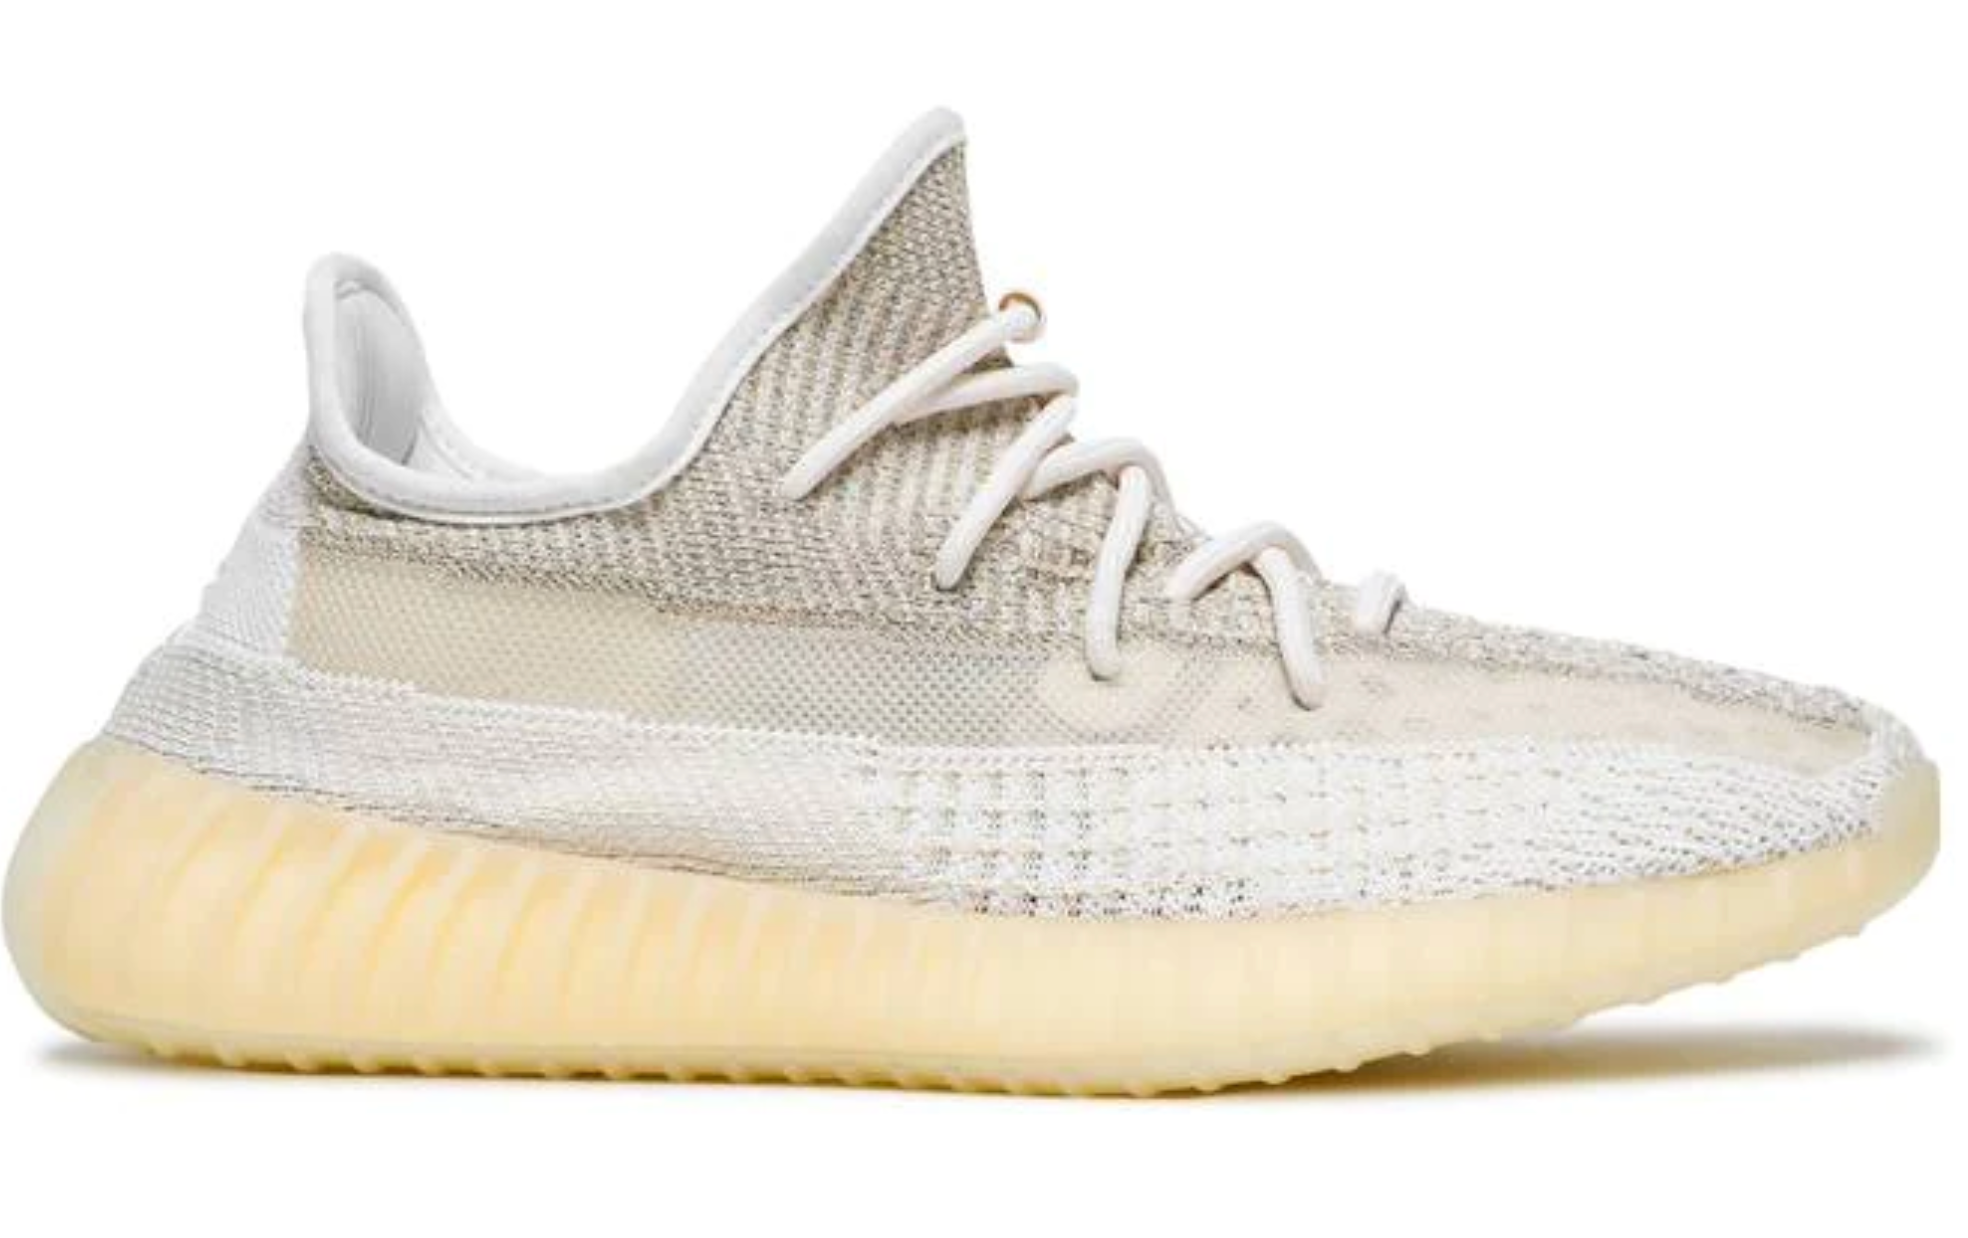 Adidas Yeezy Boost 350 V2 Natural